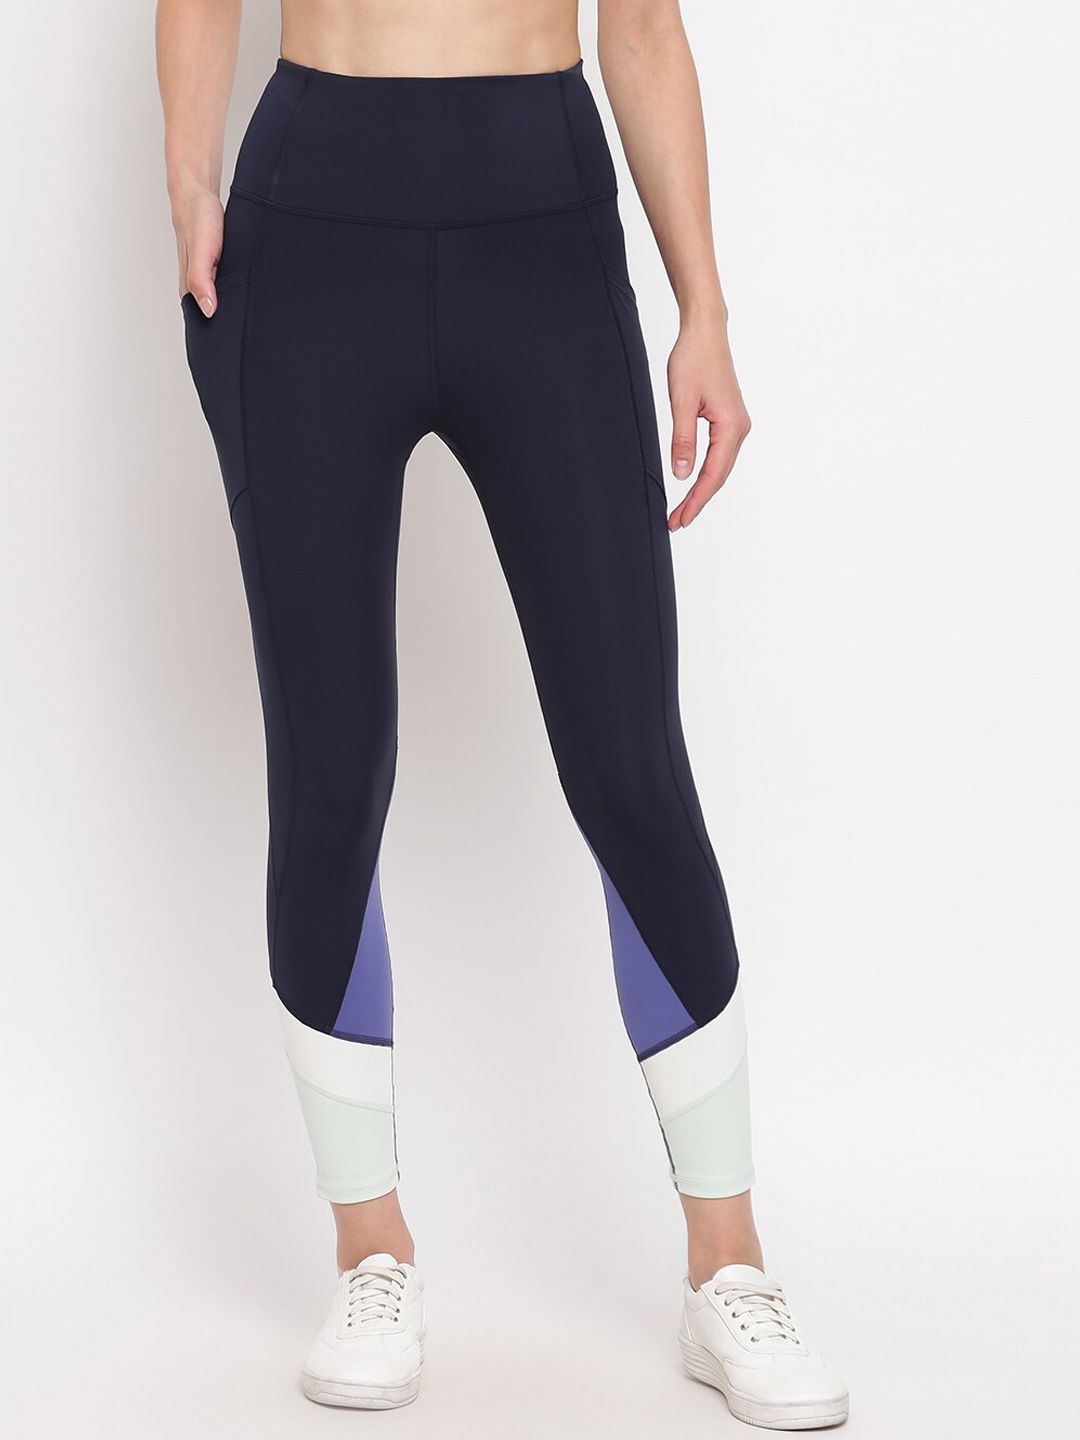 Enamor Women Athleisure Navy Blue & White Hugged Fit Gym Training Leggings Tights Price in India